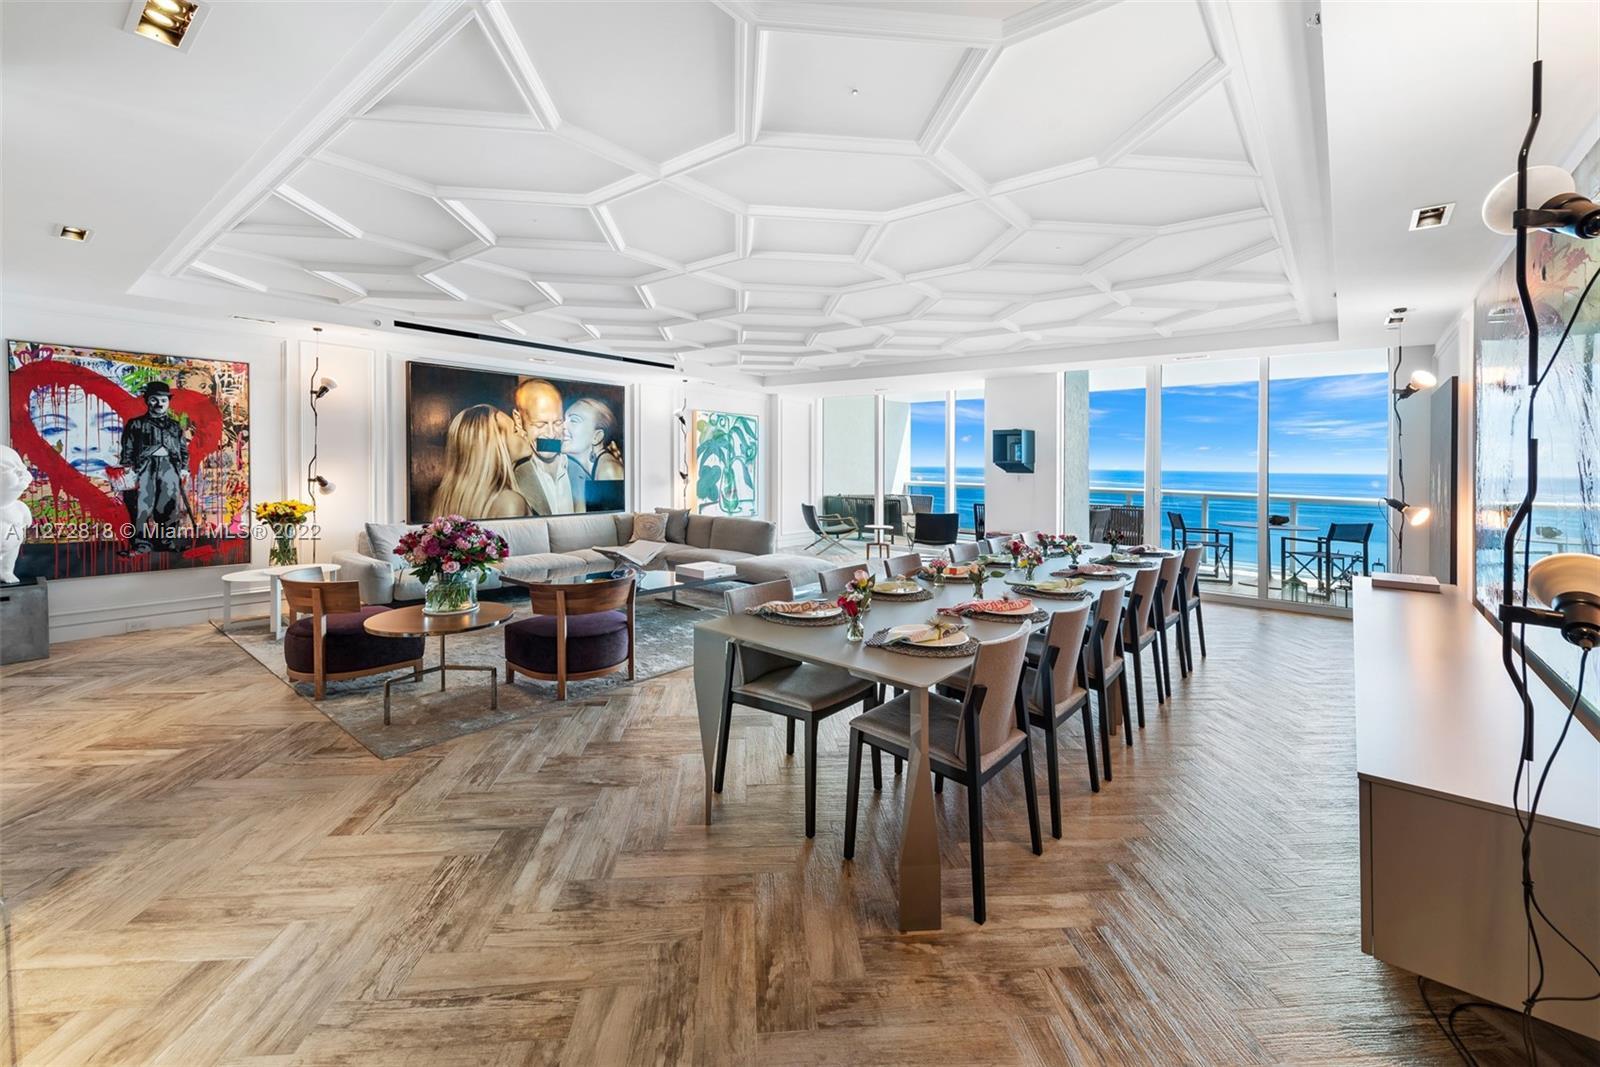 A perfect 10! Following a $2M+ renovation, this chic one-of-a-kind oceanfront residence is ready for